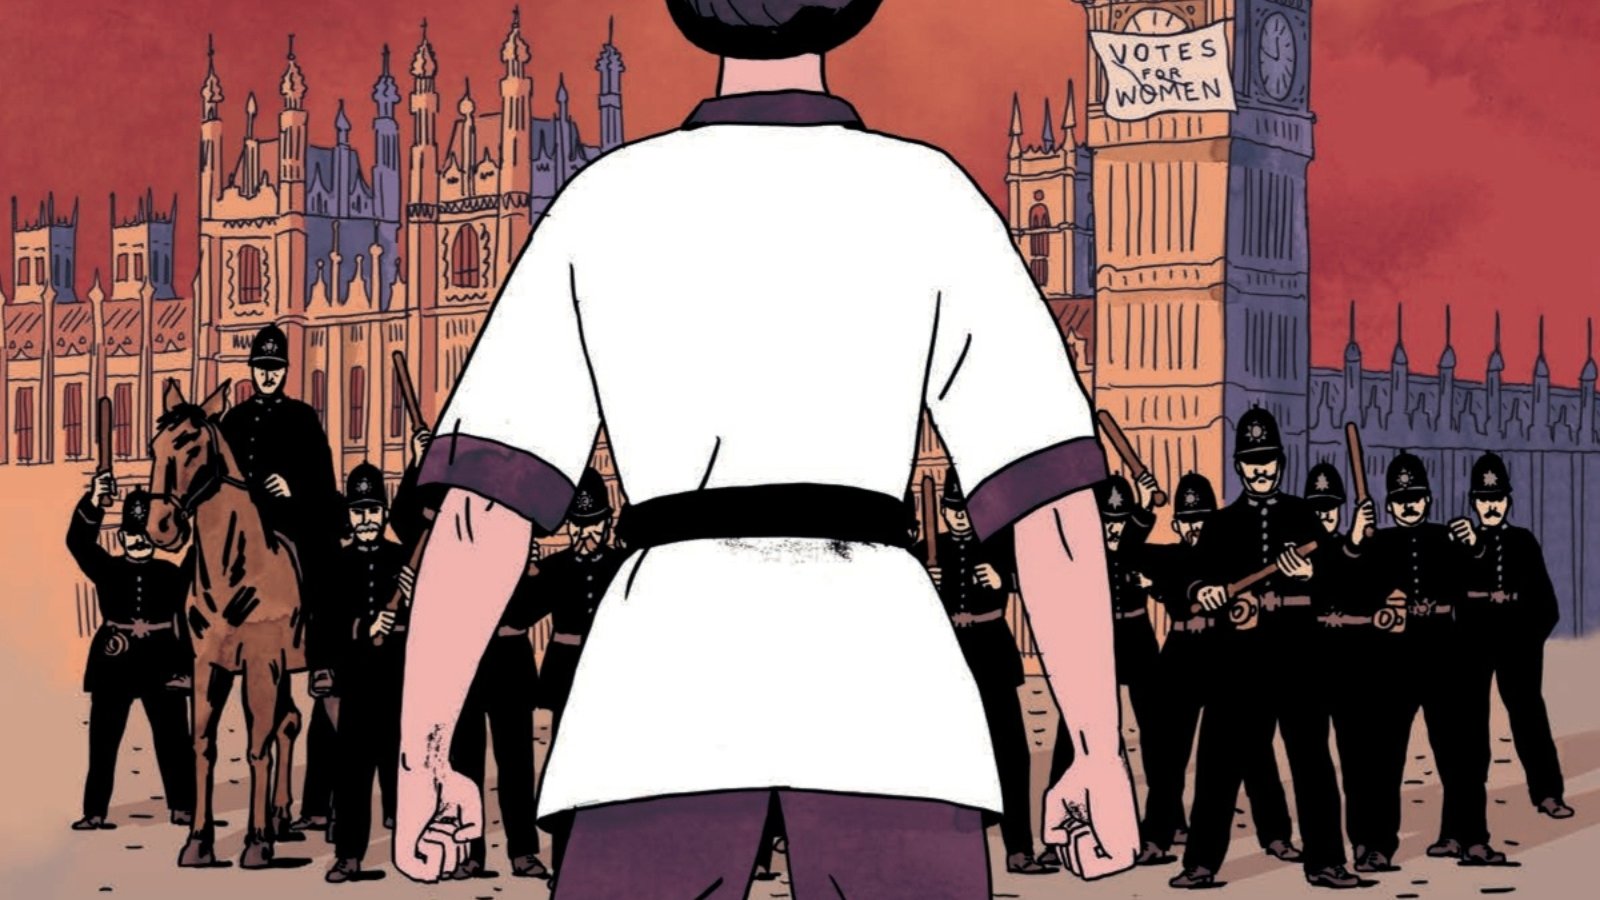 An illustration of the back of a woman wearing a martial arts uniform, overlooking violence against the women's suffrage movement in Britain.